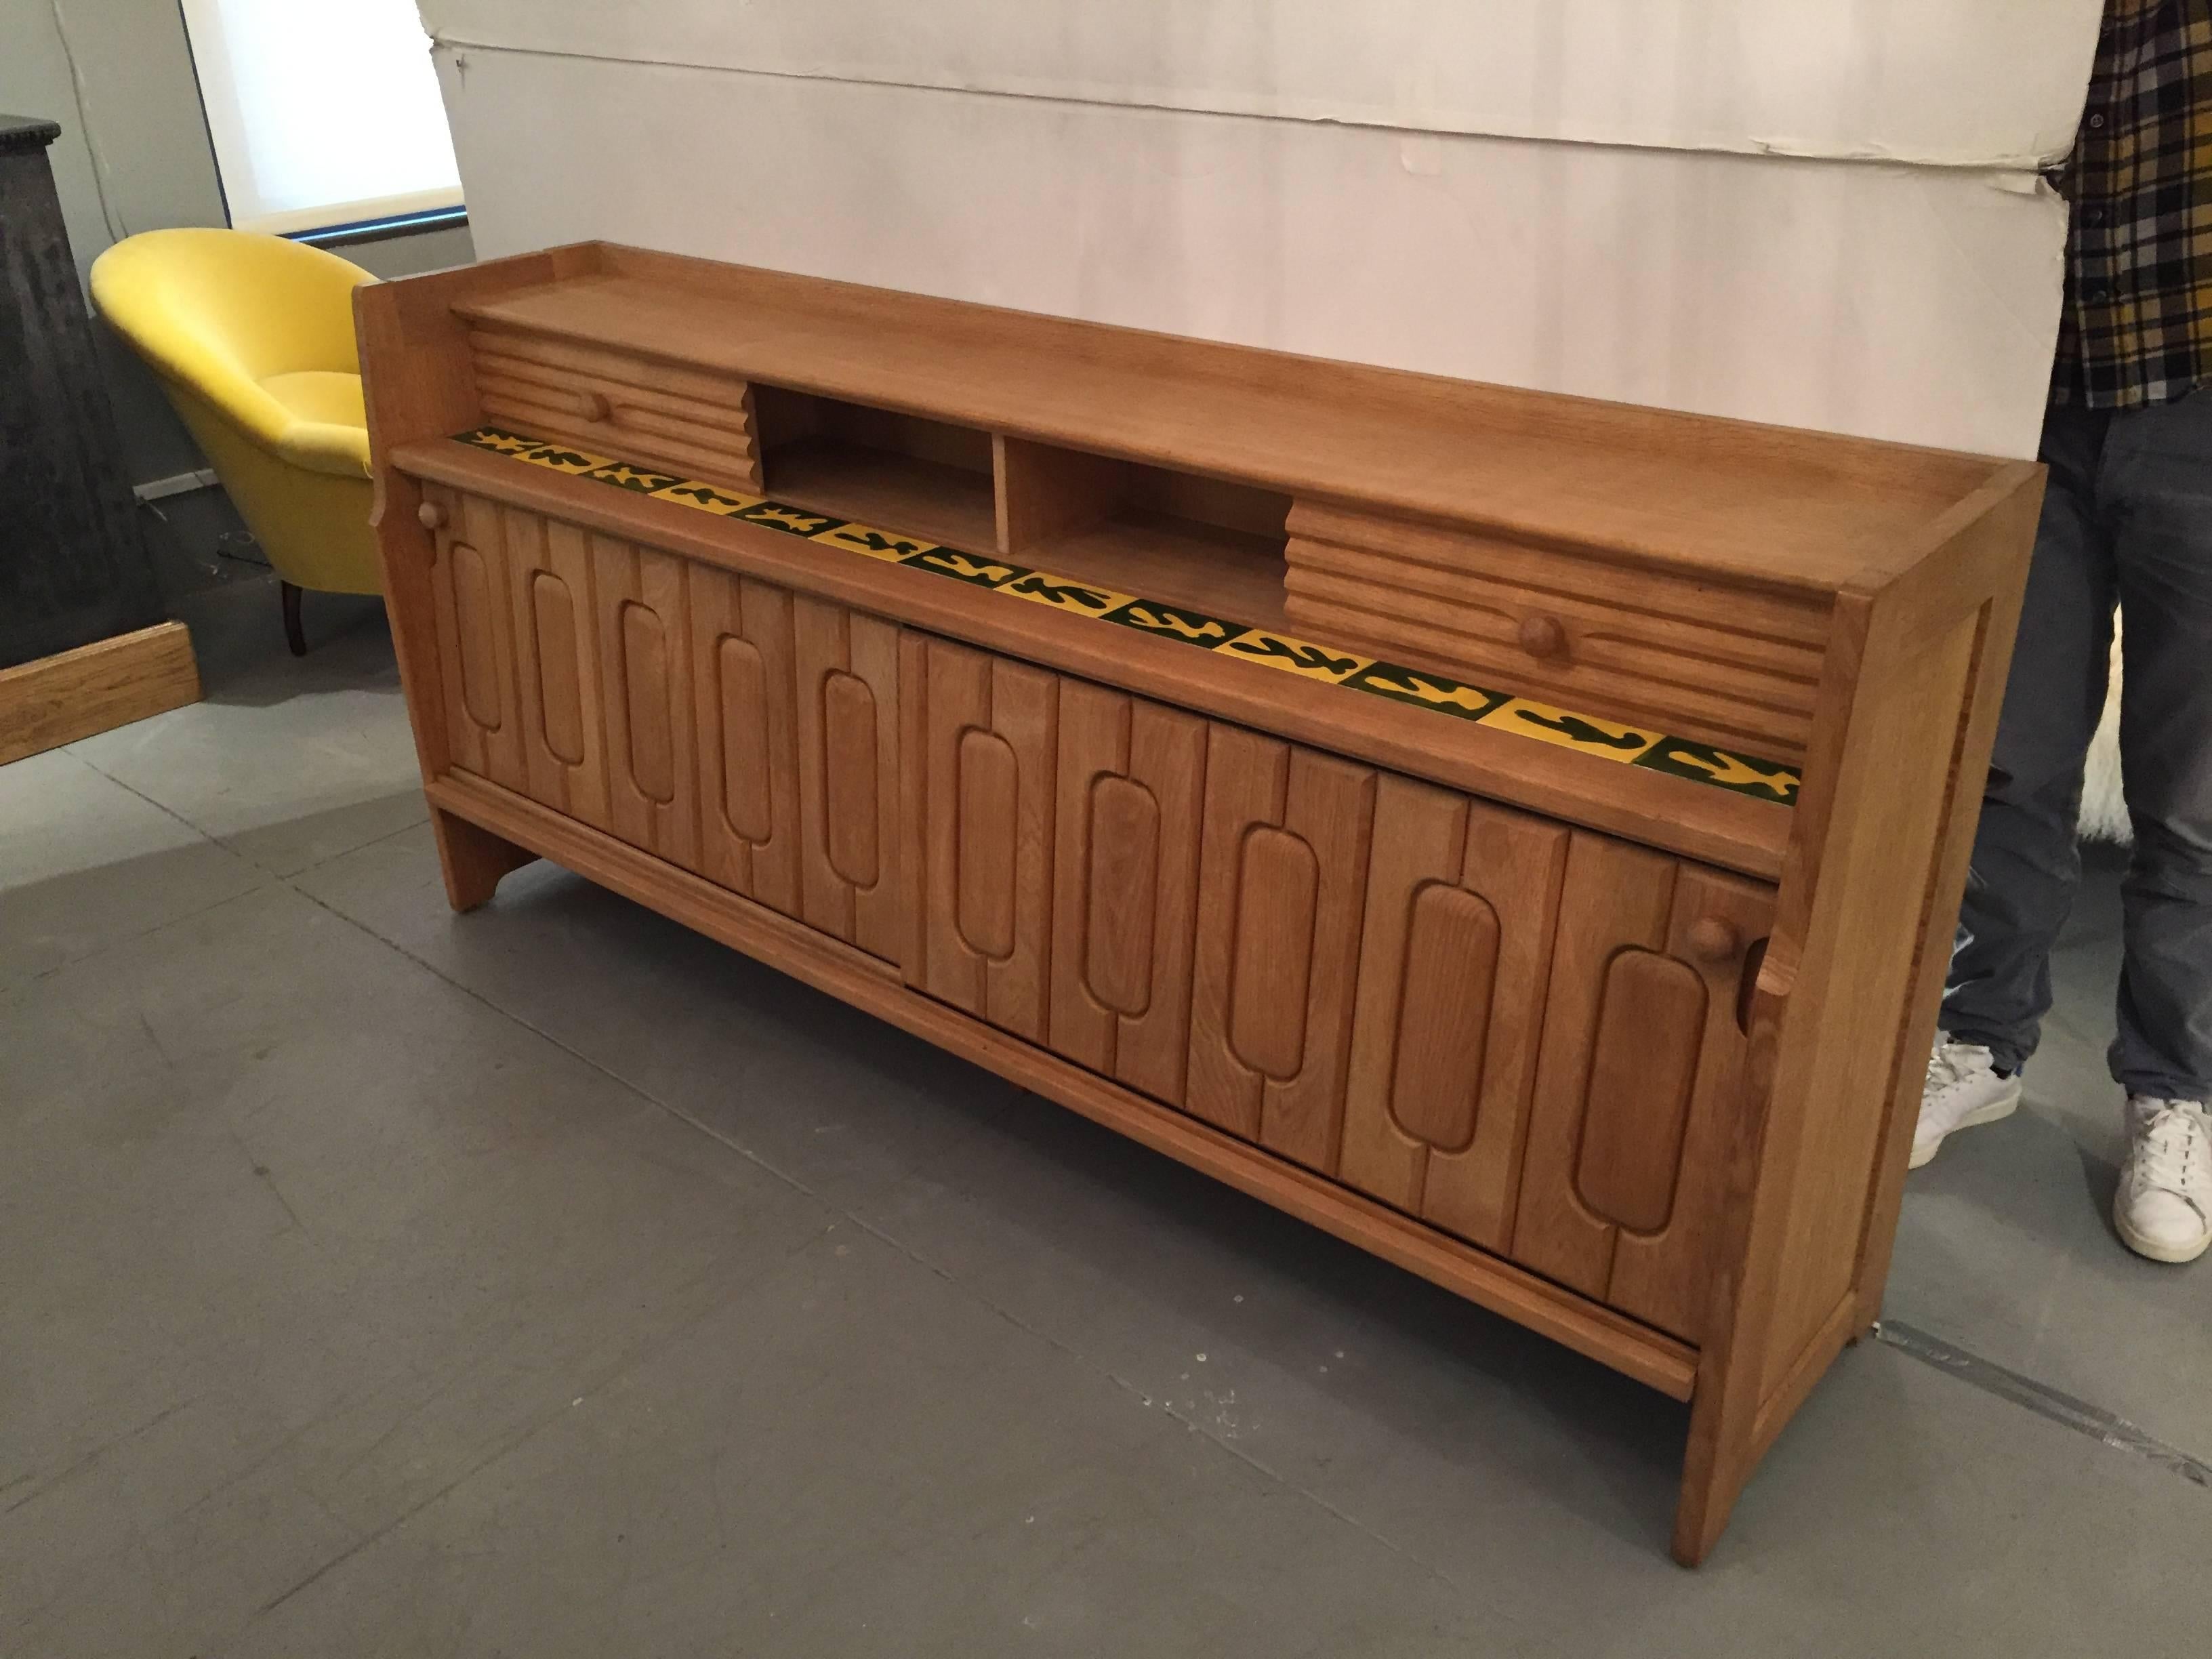 Stately oak buffet designed by Guillerme et Chambron. It has a beautiful ceramic tile design and the details of the workmanship of the wood details is perfection. The rare piece is in perfect condition. It is located in our showroom in NYC in the NY